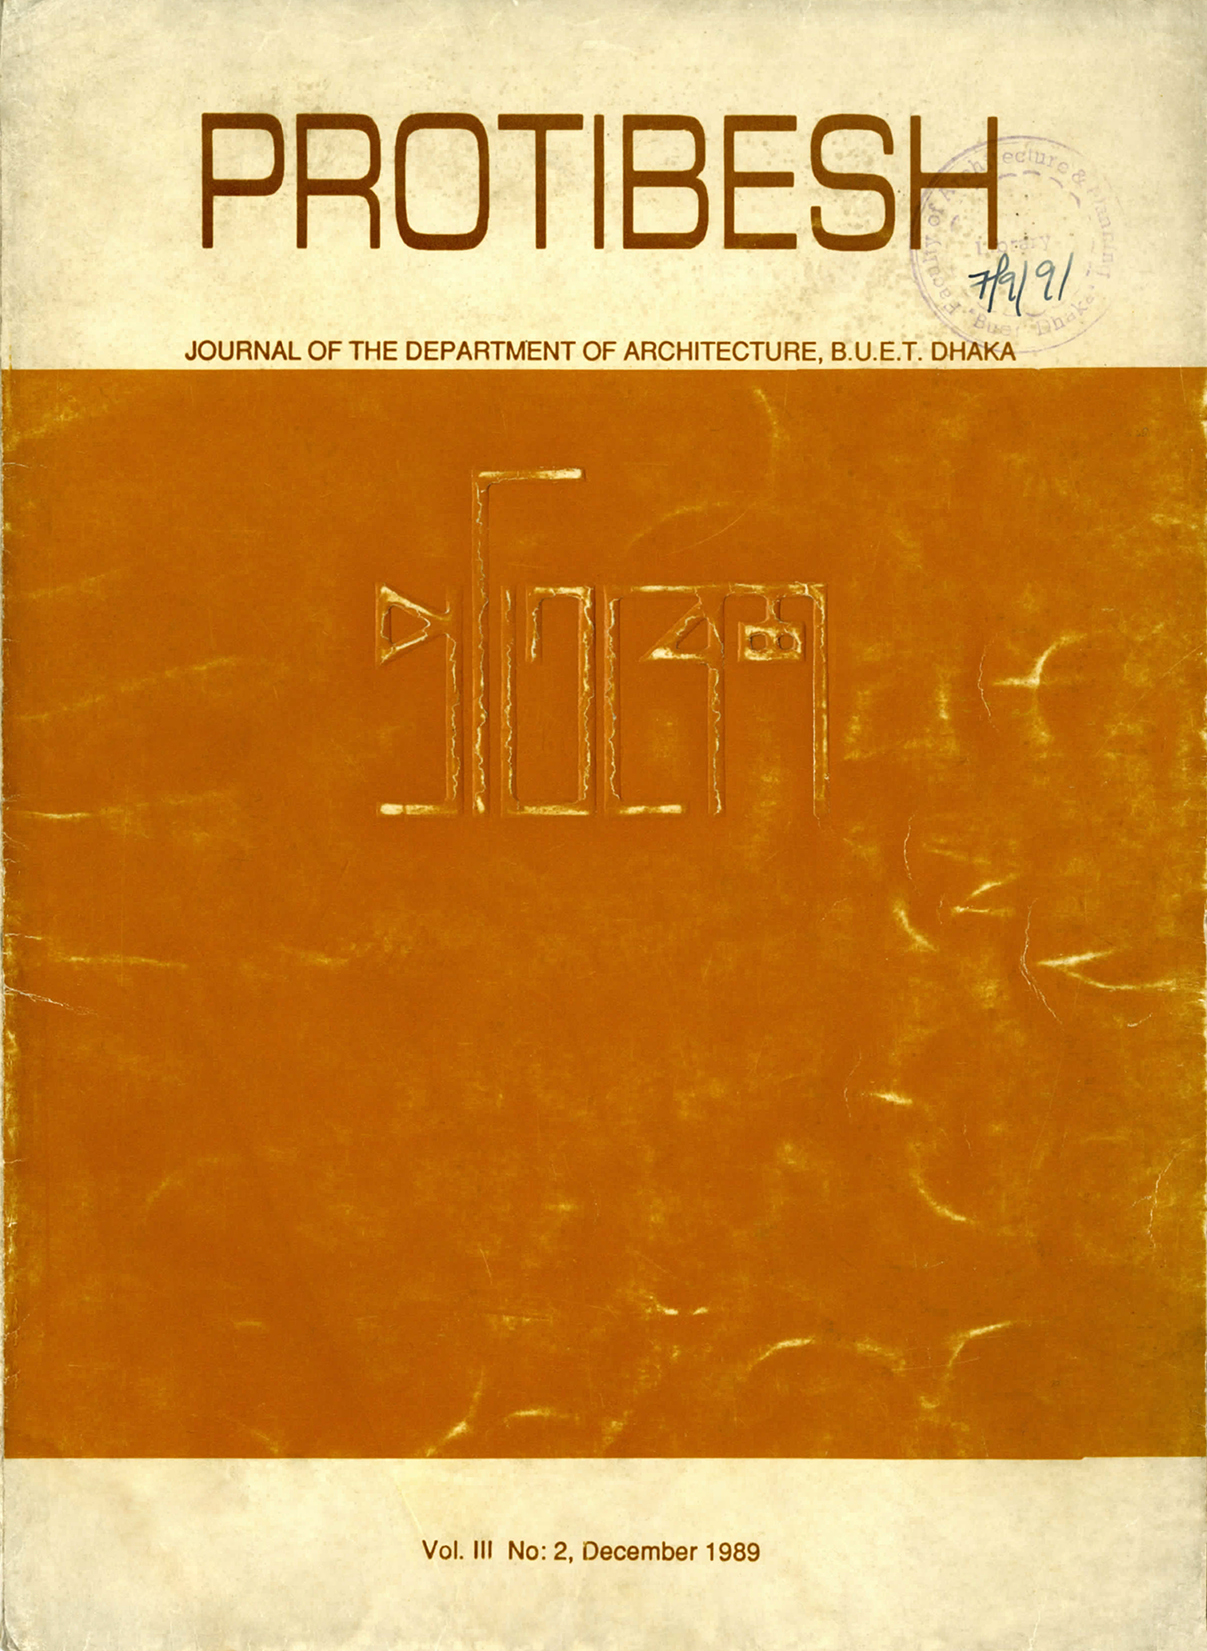 Cover image of Protibesh Vol-03 No-02 December-1989 - Journal of the Department of Architecture, BUET